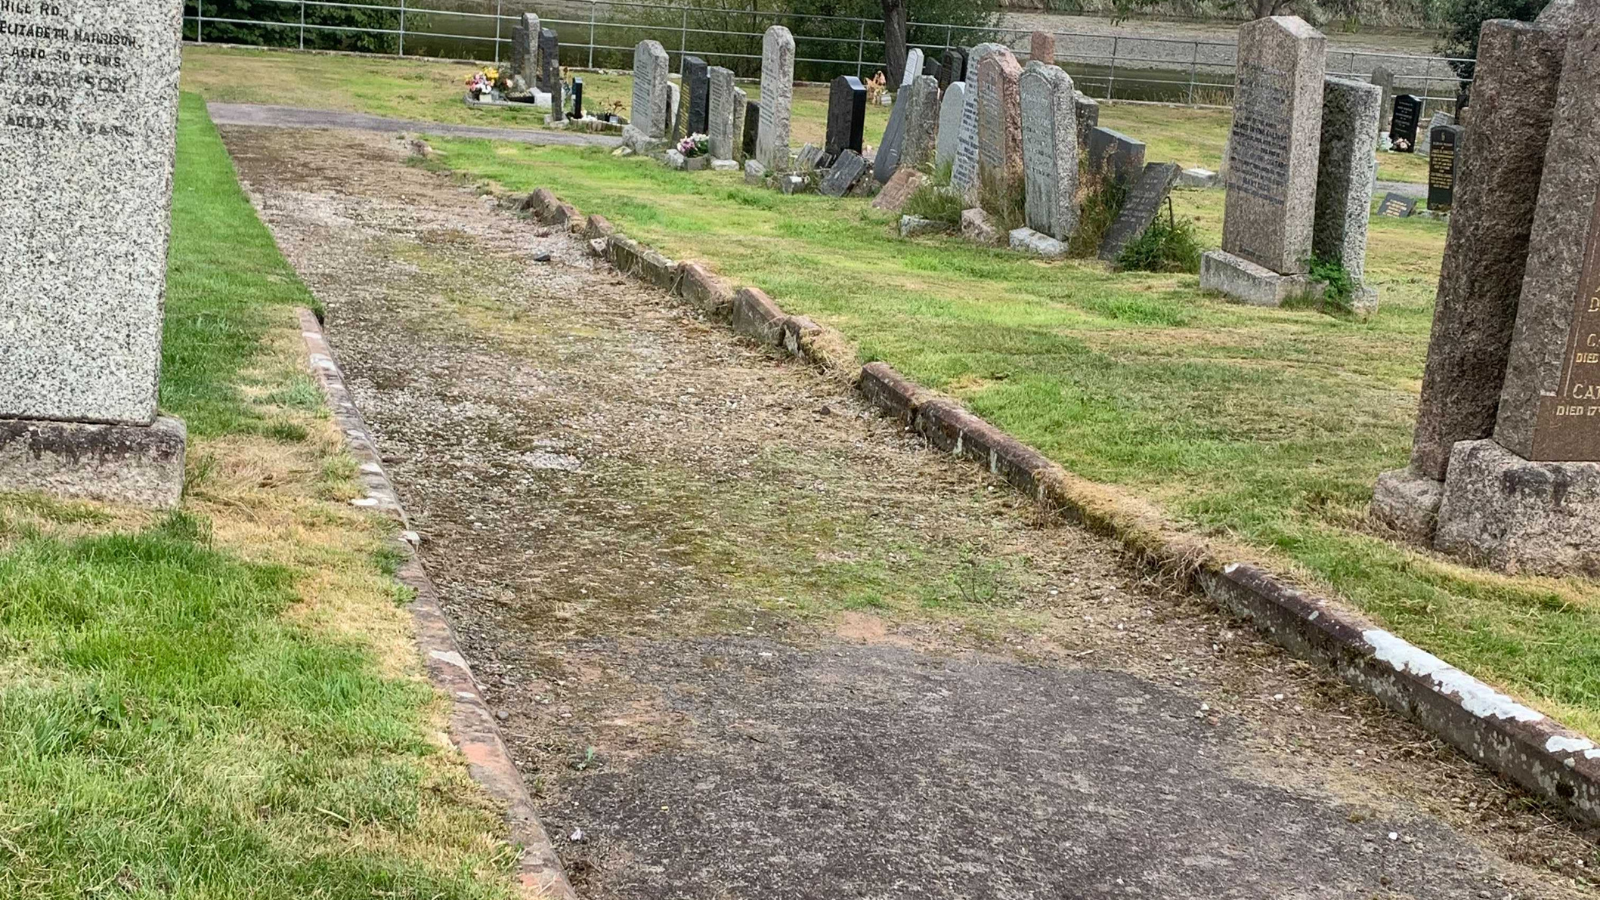 Image of a pathway within the gravesite.